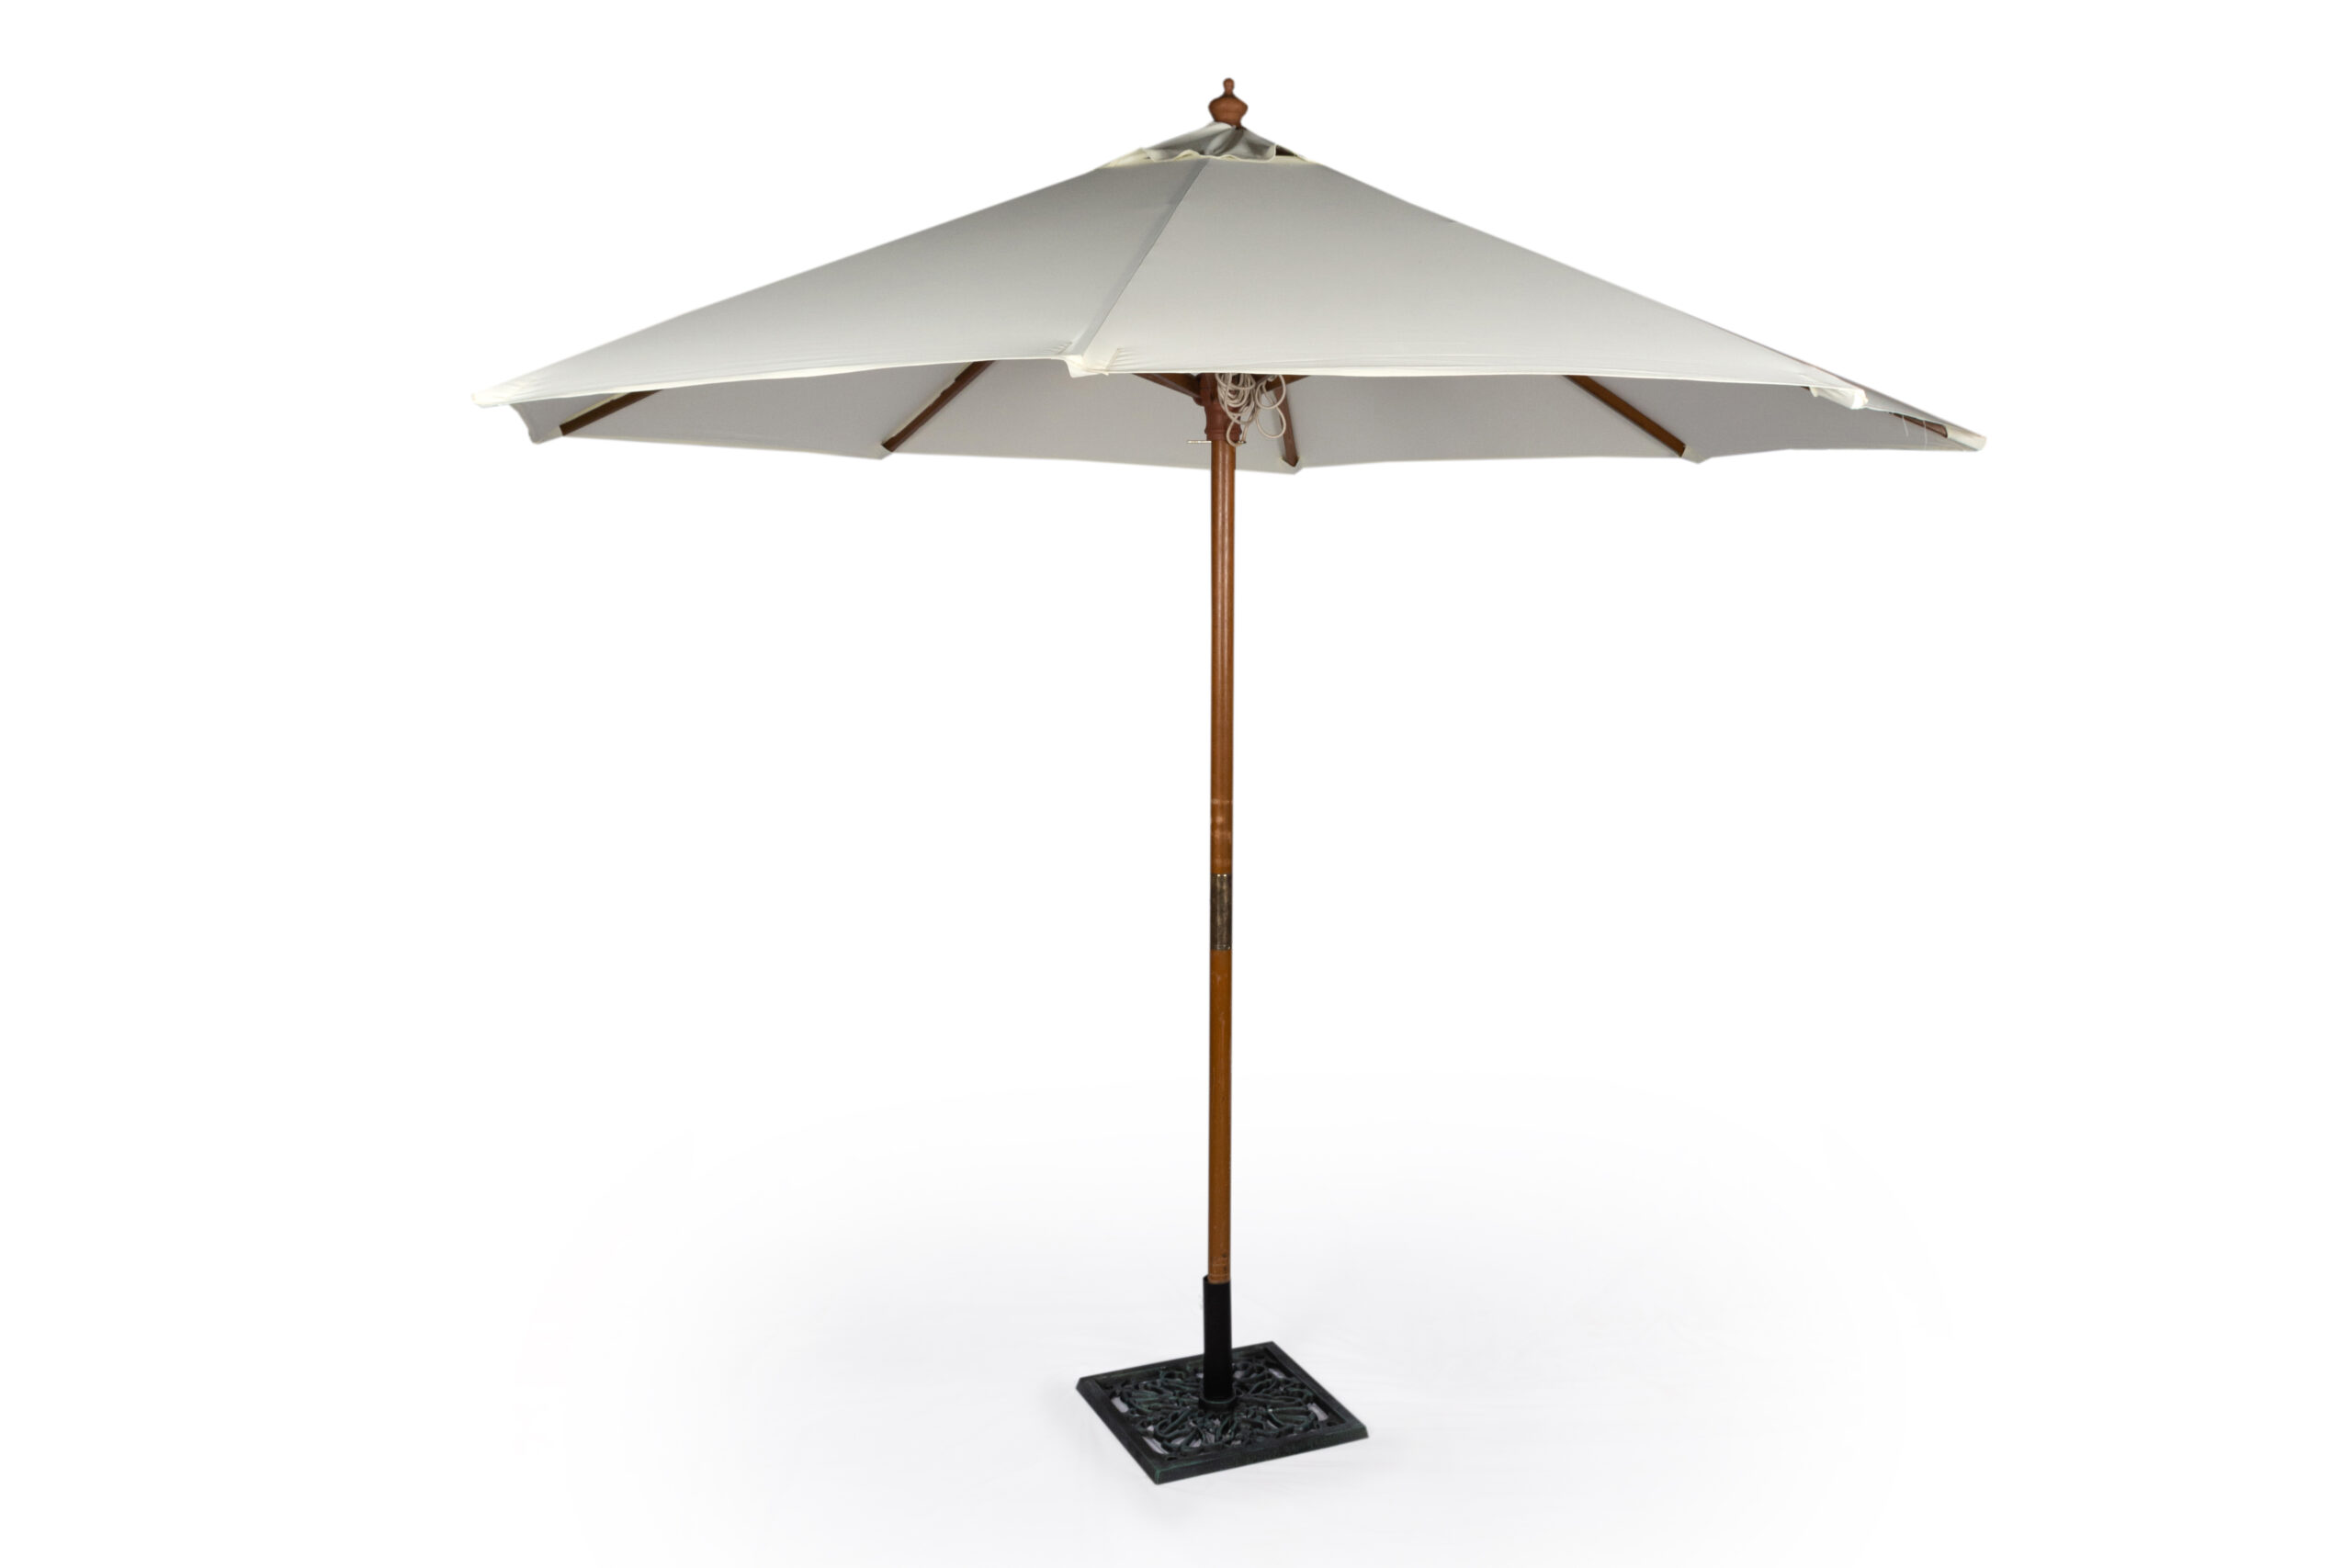 "large white outdoor market umbrella on stand - by Caesar Event Rentals Las Vegas"